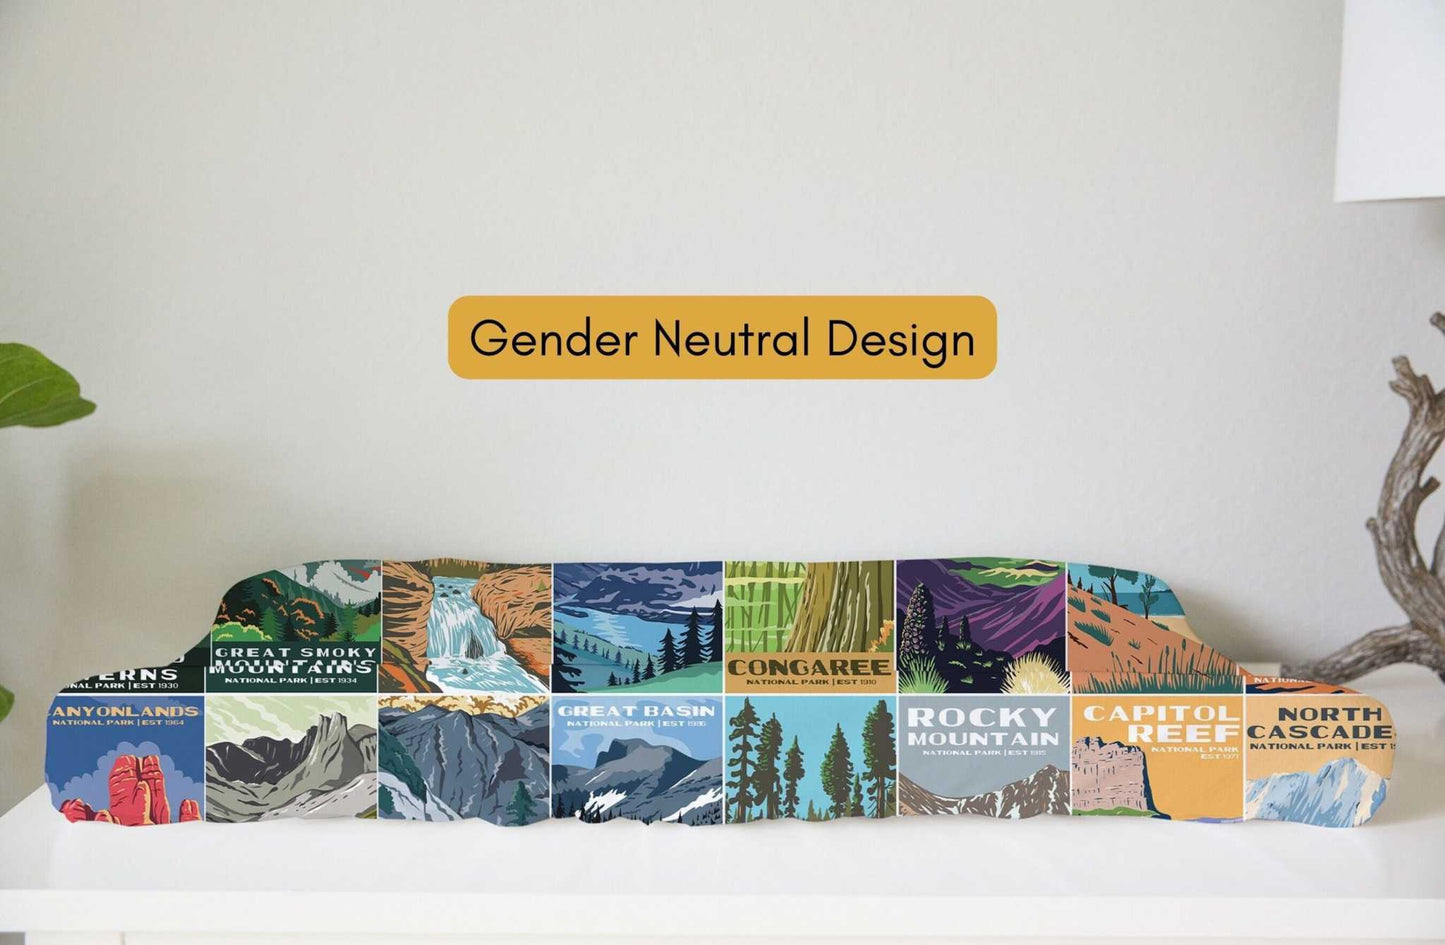 National Park Baby Changing Pad CoverComplete your National Park adventure themed nursery with this baby changing pad cover inspired by vintage National Park posters. The colors are gender neutral and a